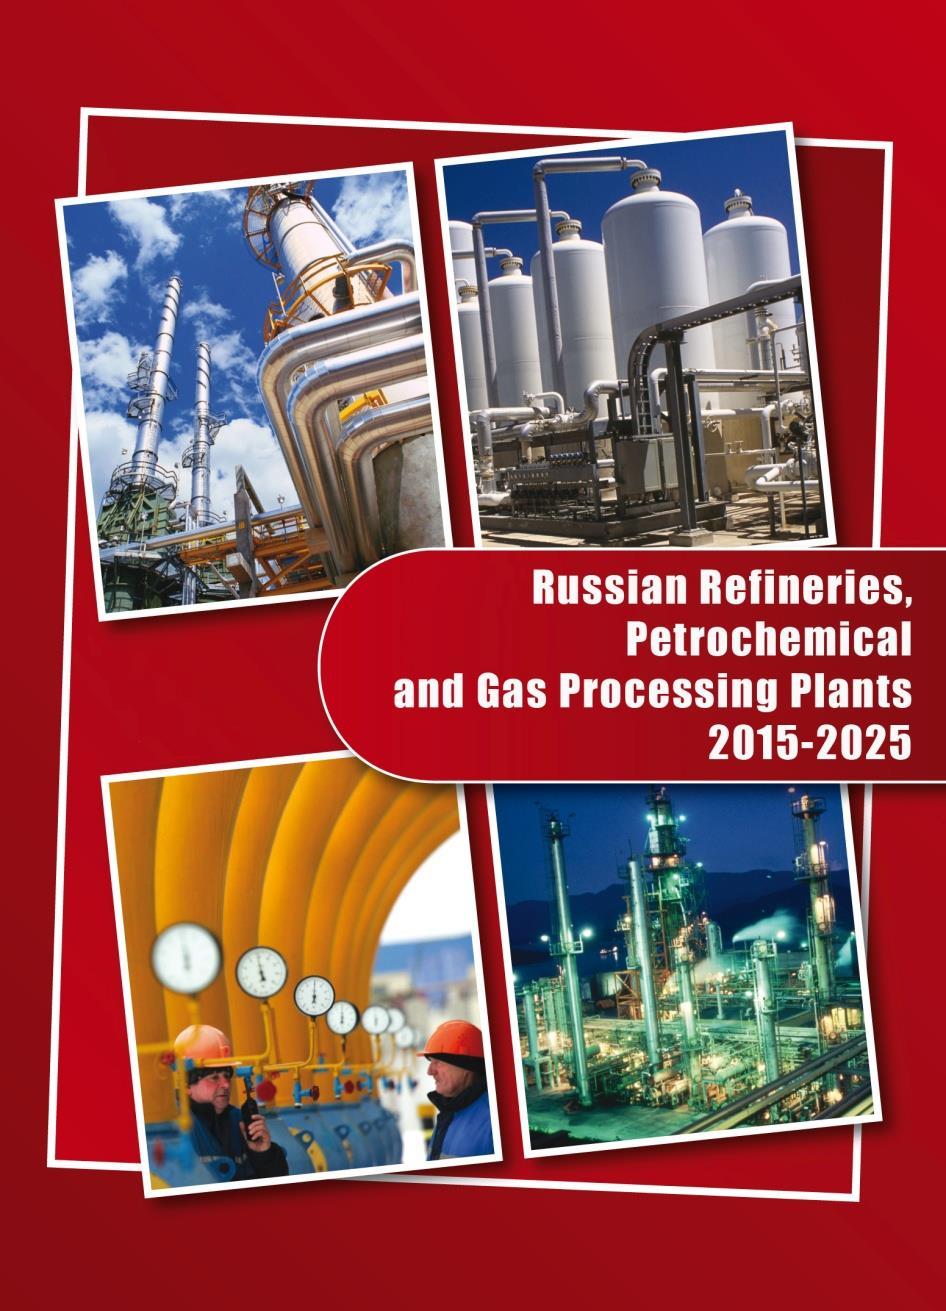 plants, refinery upgrading programs Base year for the study will be 2015 with projections for 2025 The